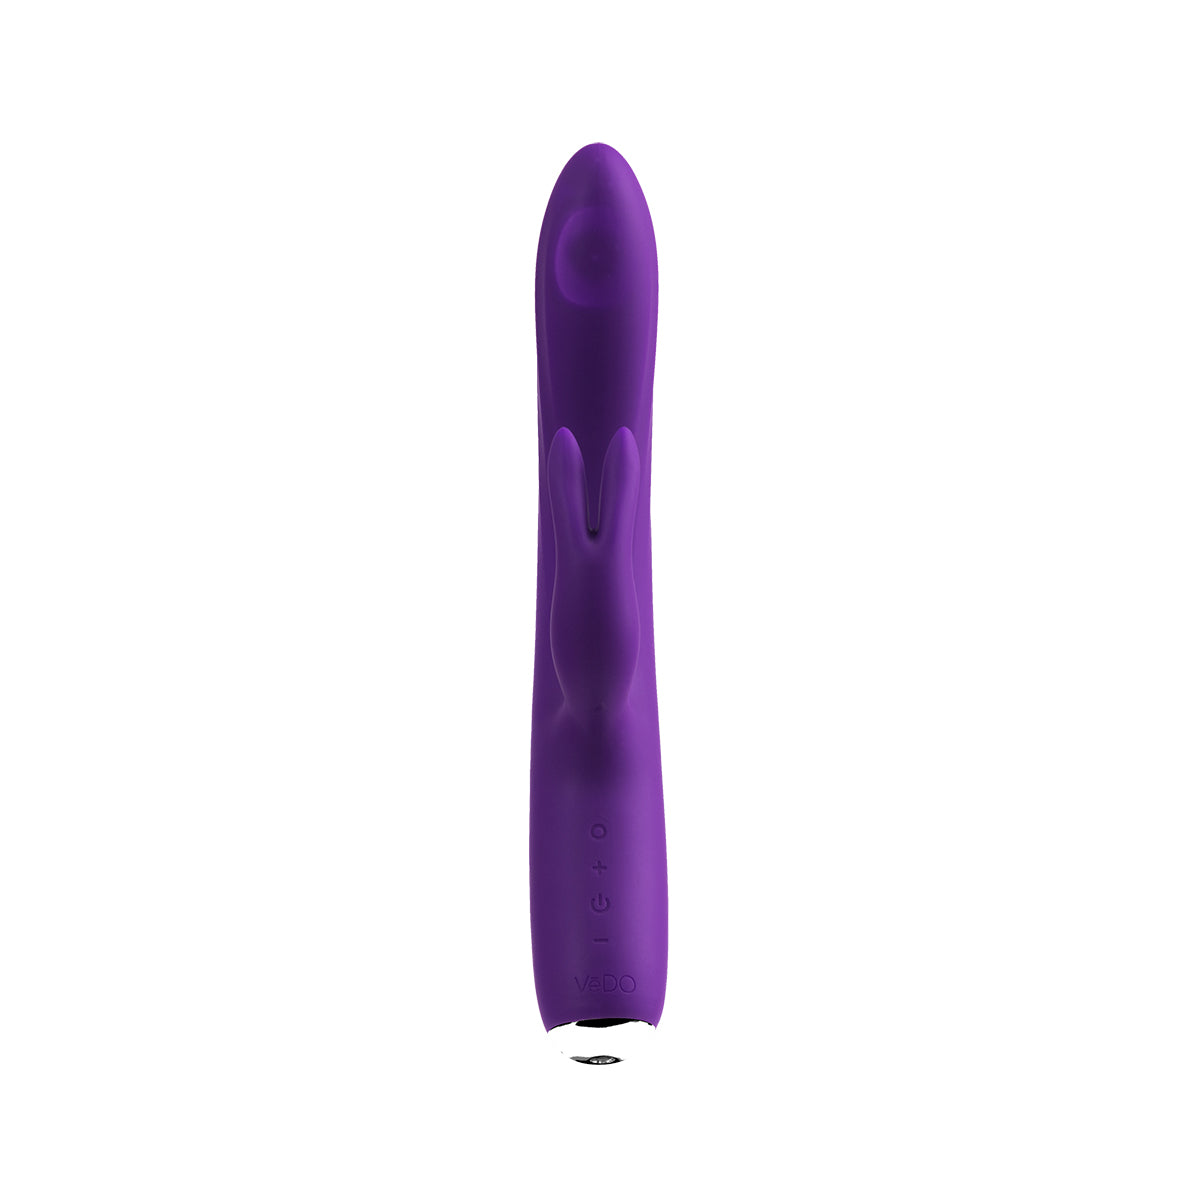 VeDO Thumper Bunny Tapping Dual Vibe - Deep Purple